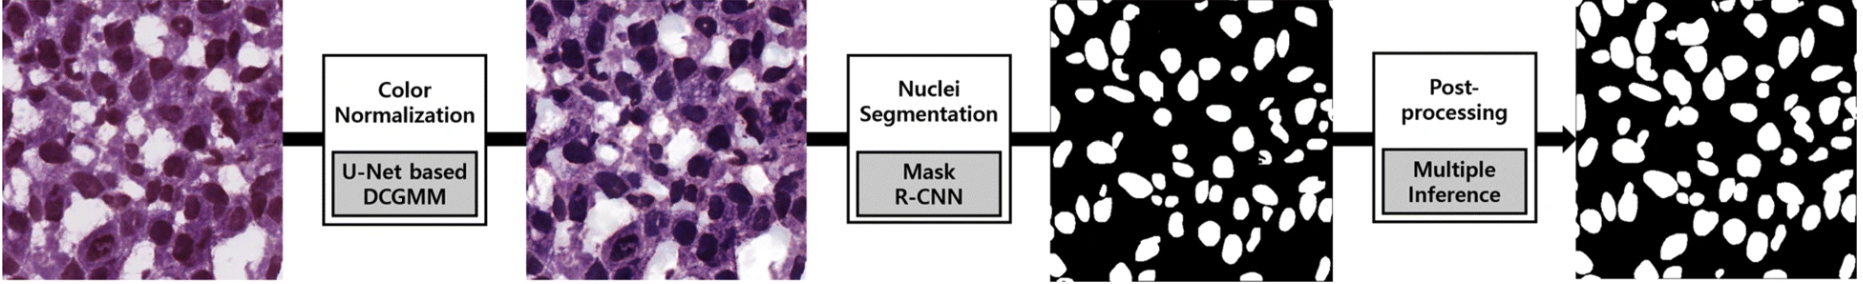  instance segmentation of nuclei from H&E stain